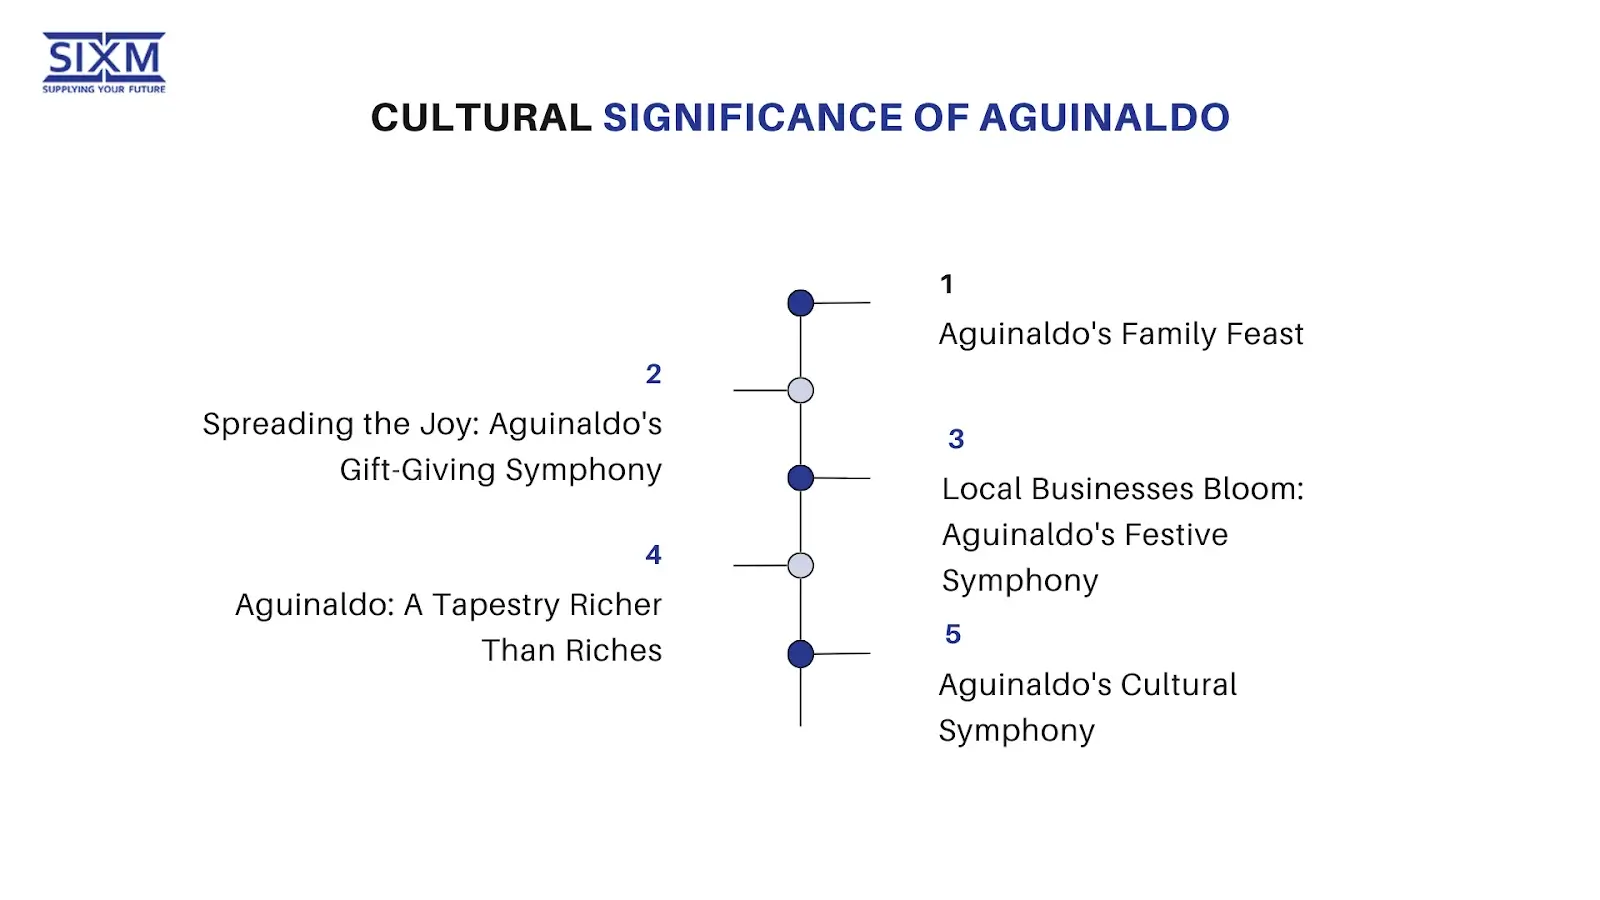 Image About Cultural Significance of Aguinaldo